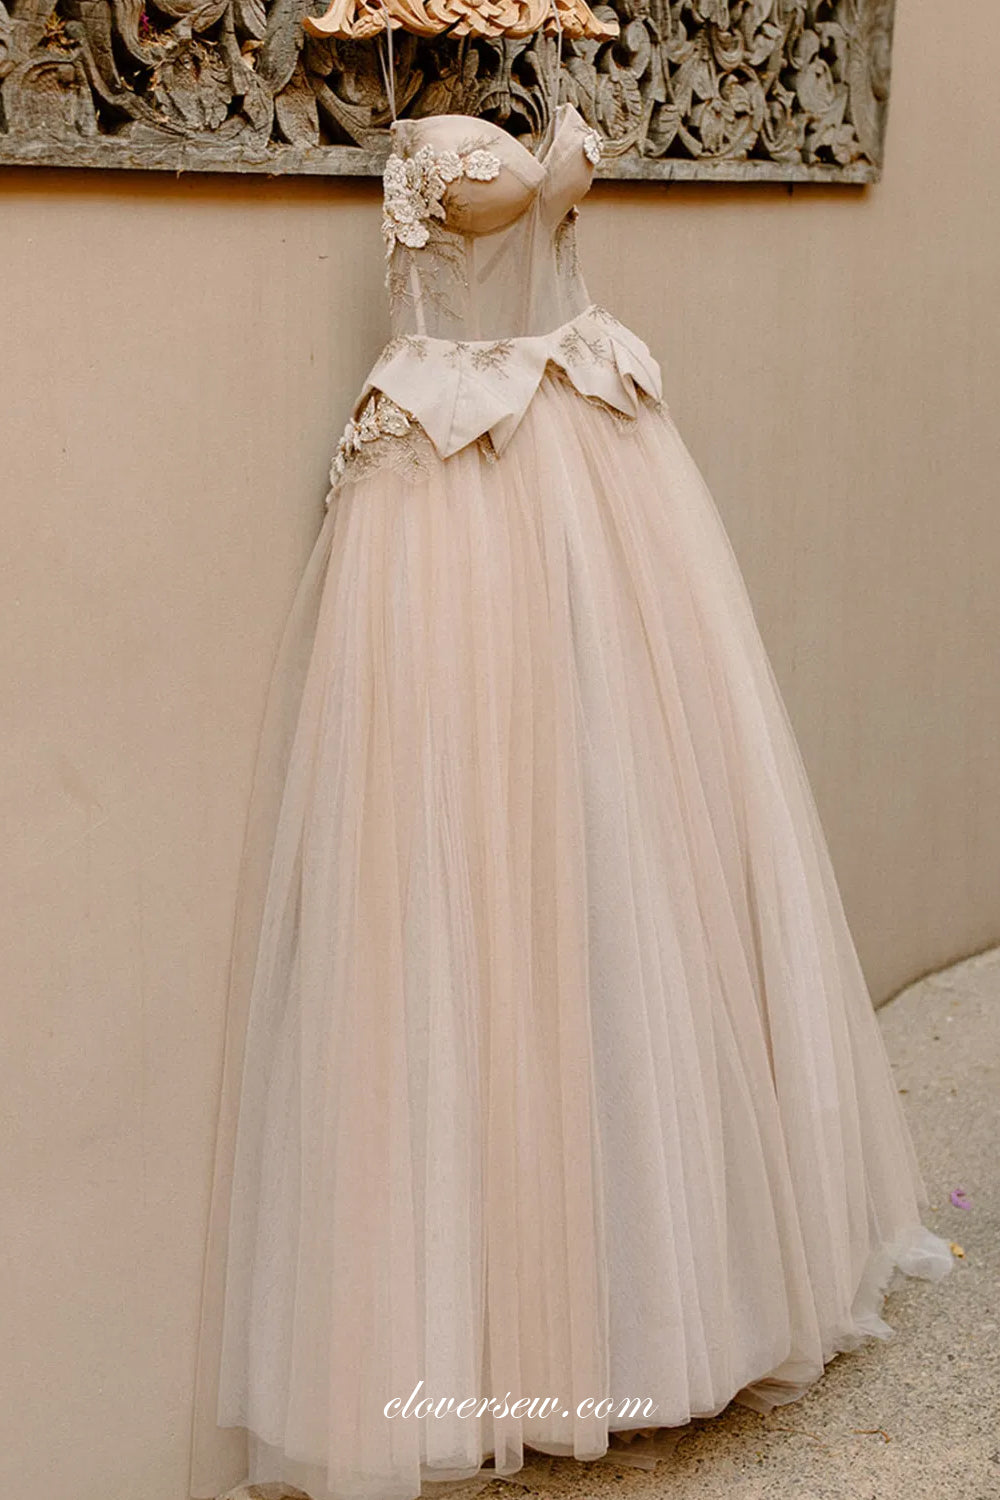 Nude Vintage Princess Sweetheart Applique Ball Gown Wedding Dresses, CW0257